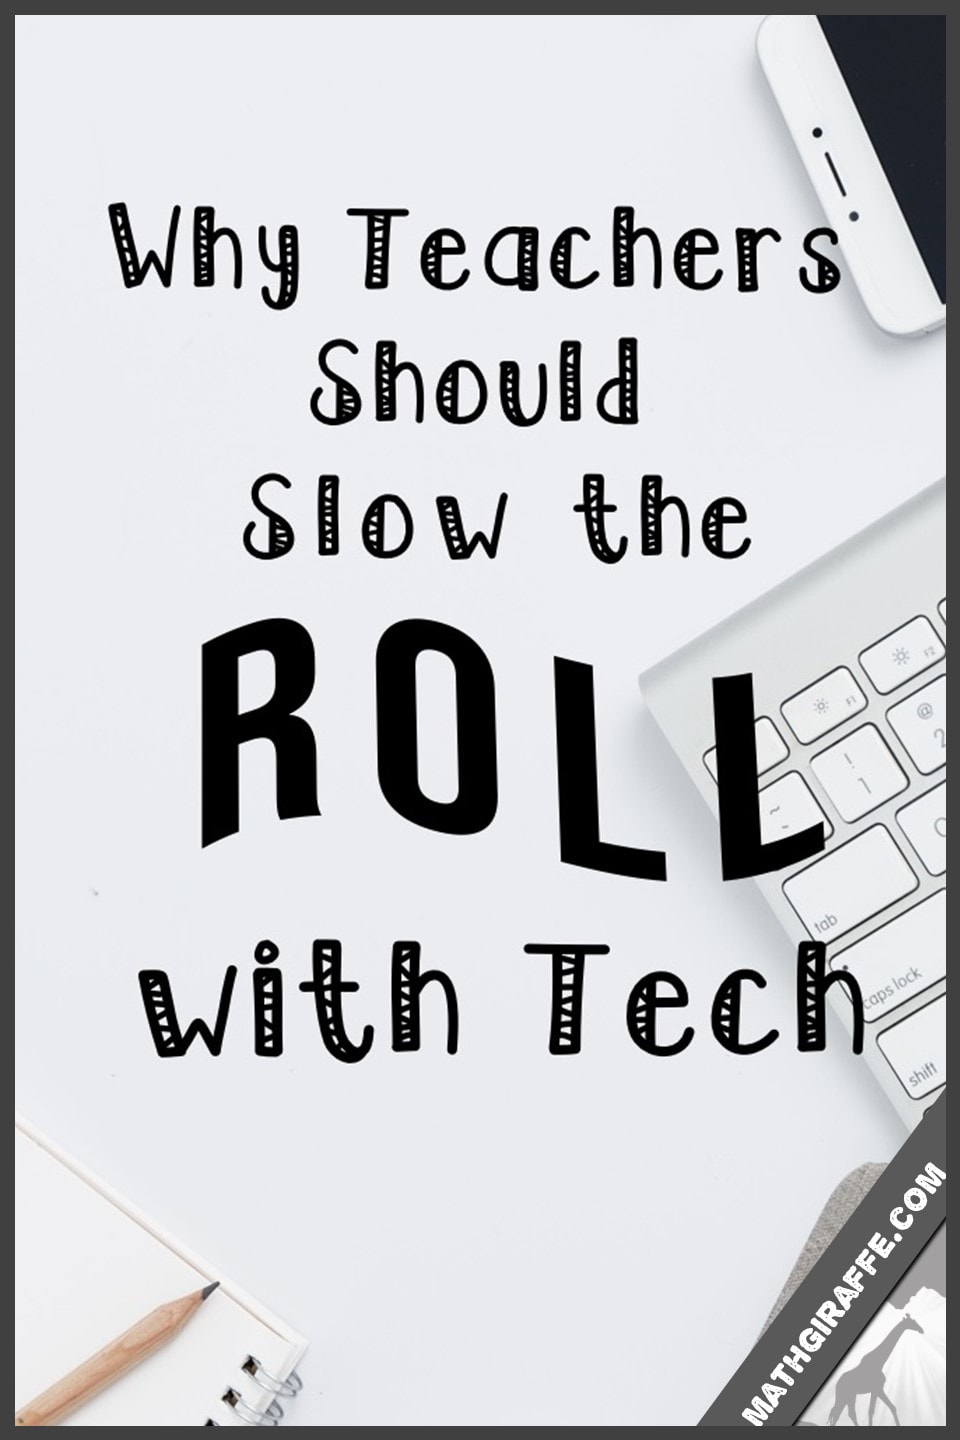 Teachers, Slow the Roll with Tech! - While technology has its uses in the classroom, there are some startling facts and stats that cannot be ignored.